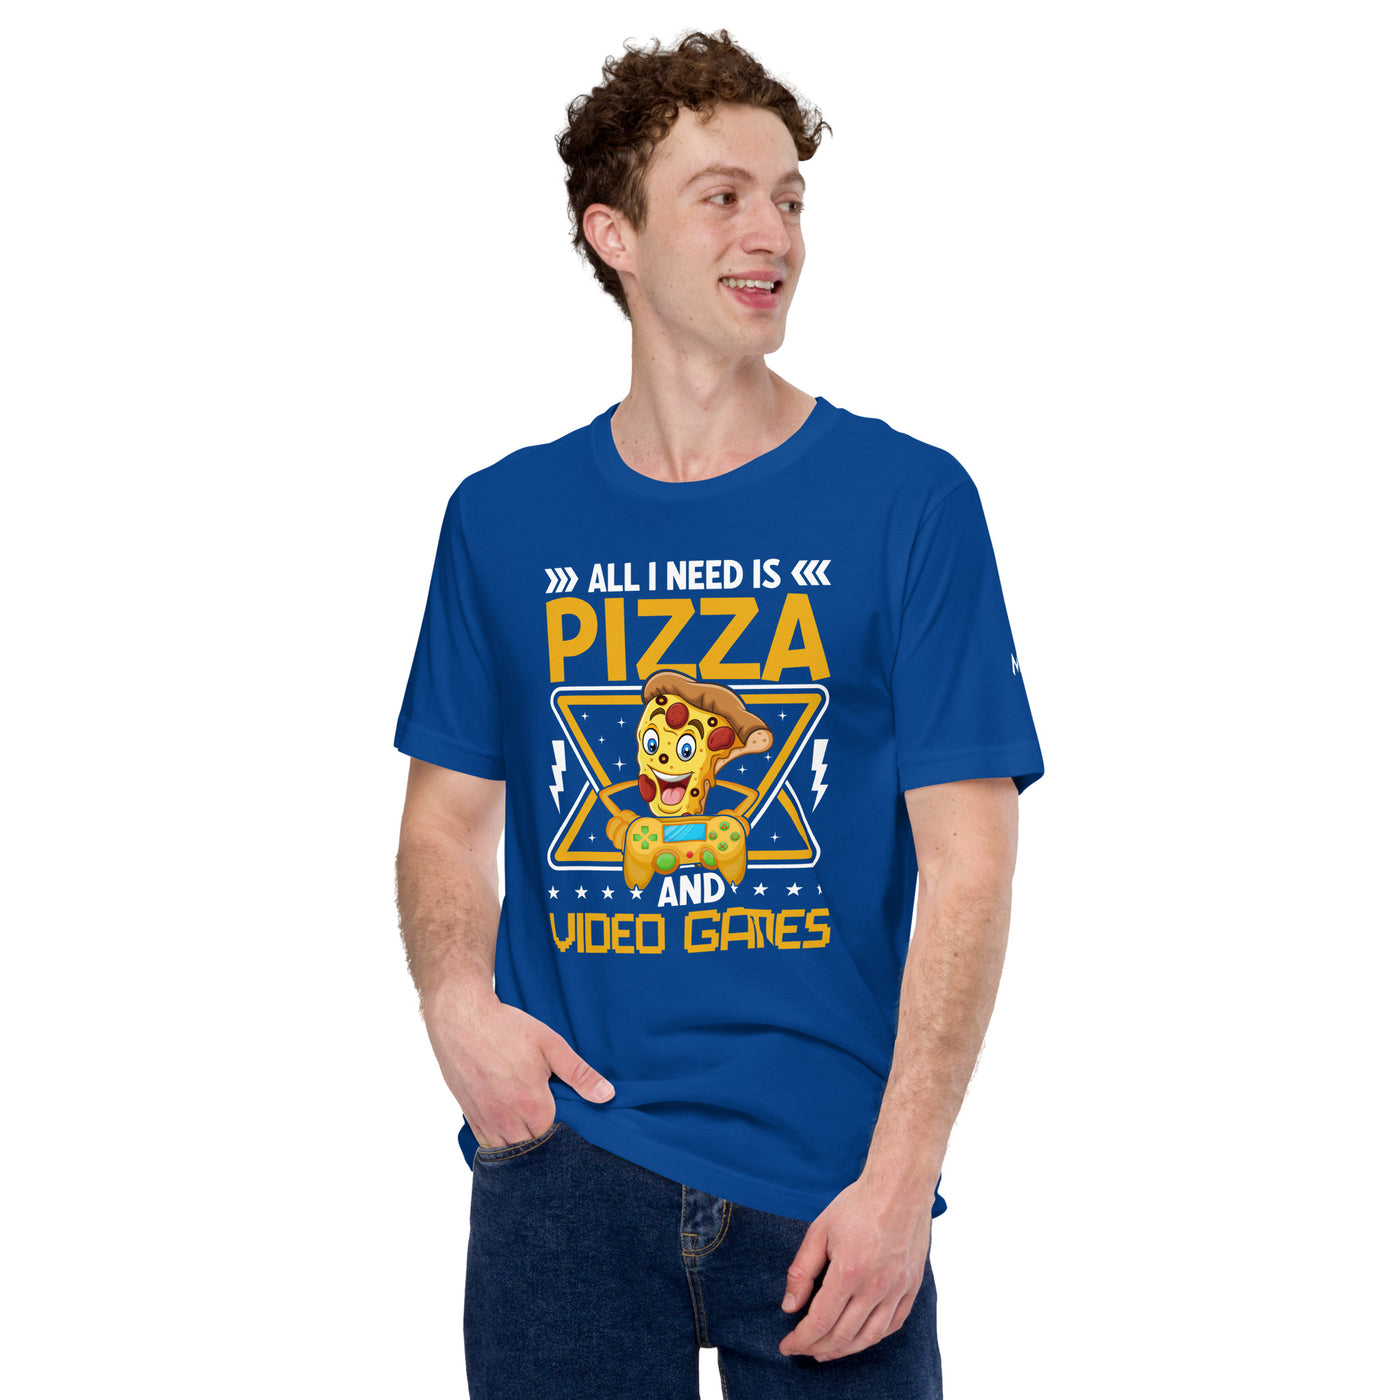 All I need is Pizza - Unisex t-shirt